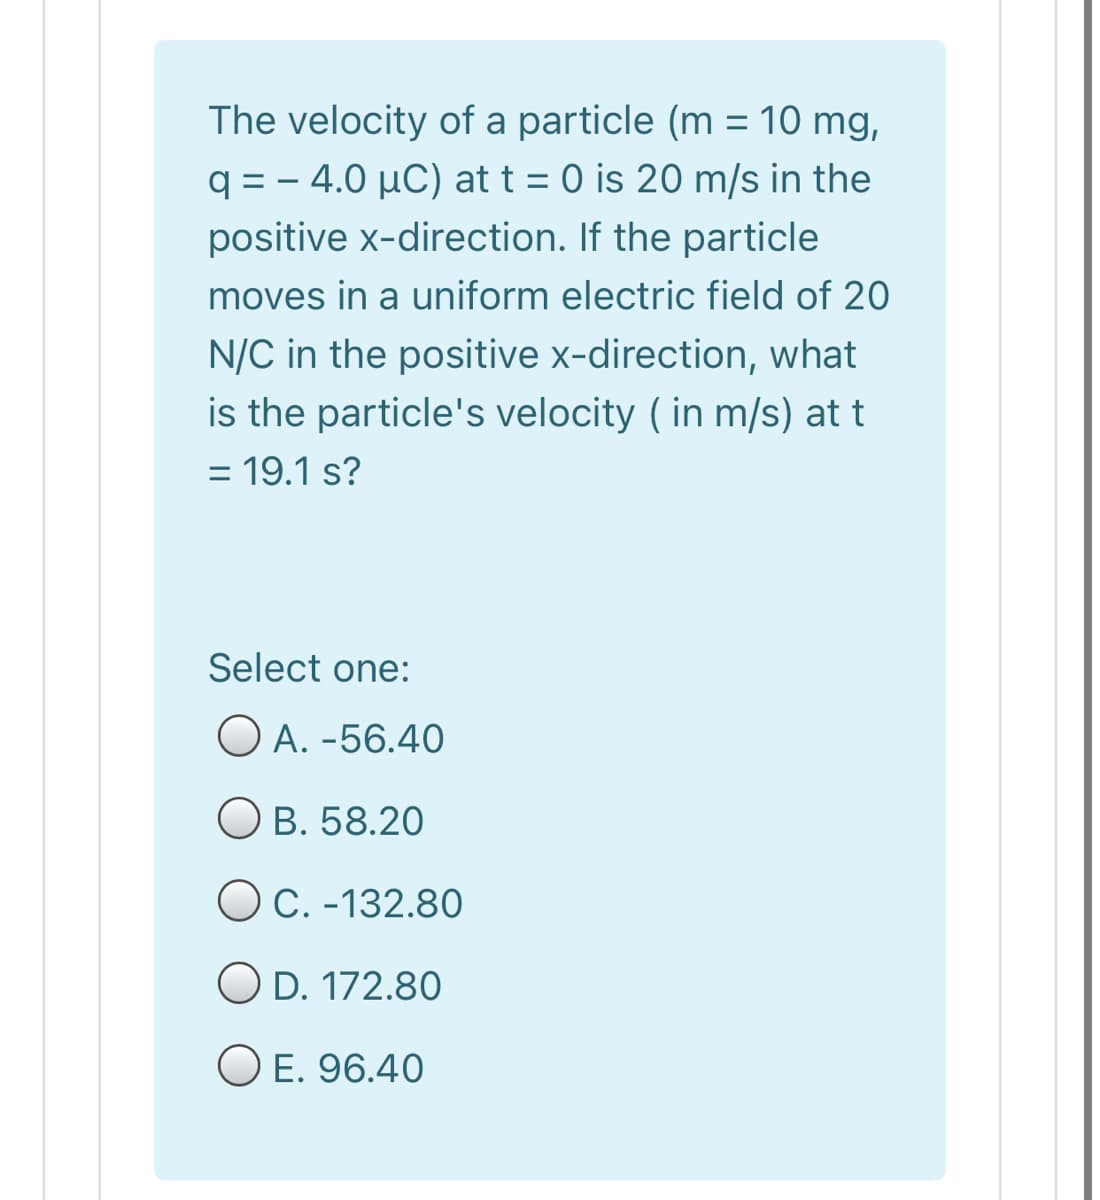 The velocity of a particle (m = 10 mg,
q = – 4.0 µC) at t = 0 is 20 m/s in the
positive x-direction. If the particle
moves in a uniform electric field of 20
N/C in the positive x-direction, what
is the particle's velocity ( in m/s) at t
= 19.1 s?
%3D
Select one:
O A. -56.40
O B. 58.20
OC. -132.80
O D. 172.80
O E. 96.40
